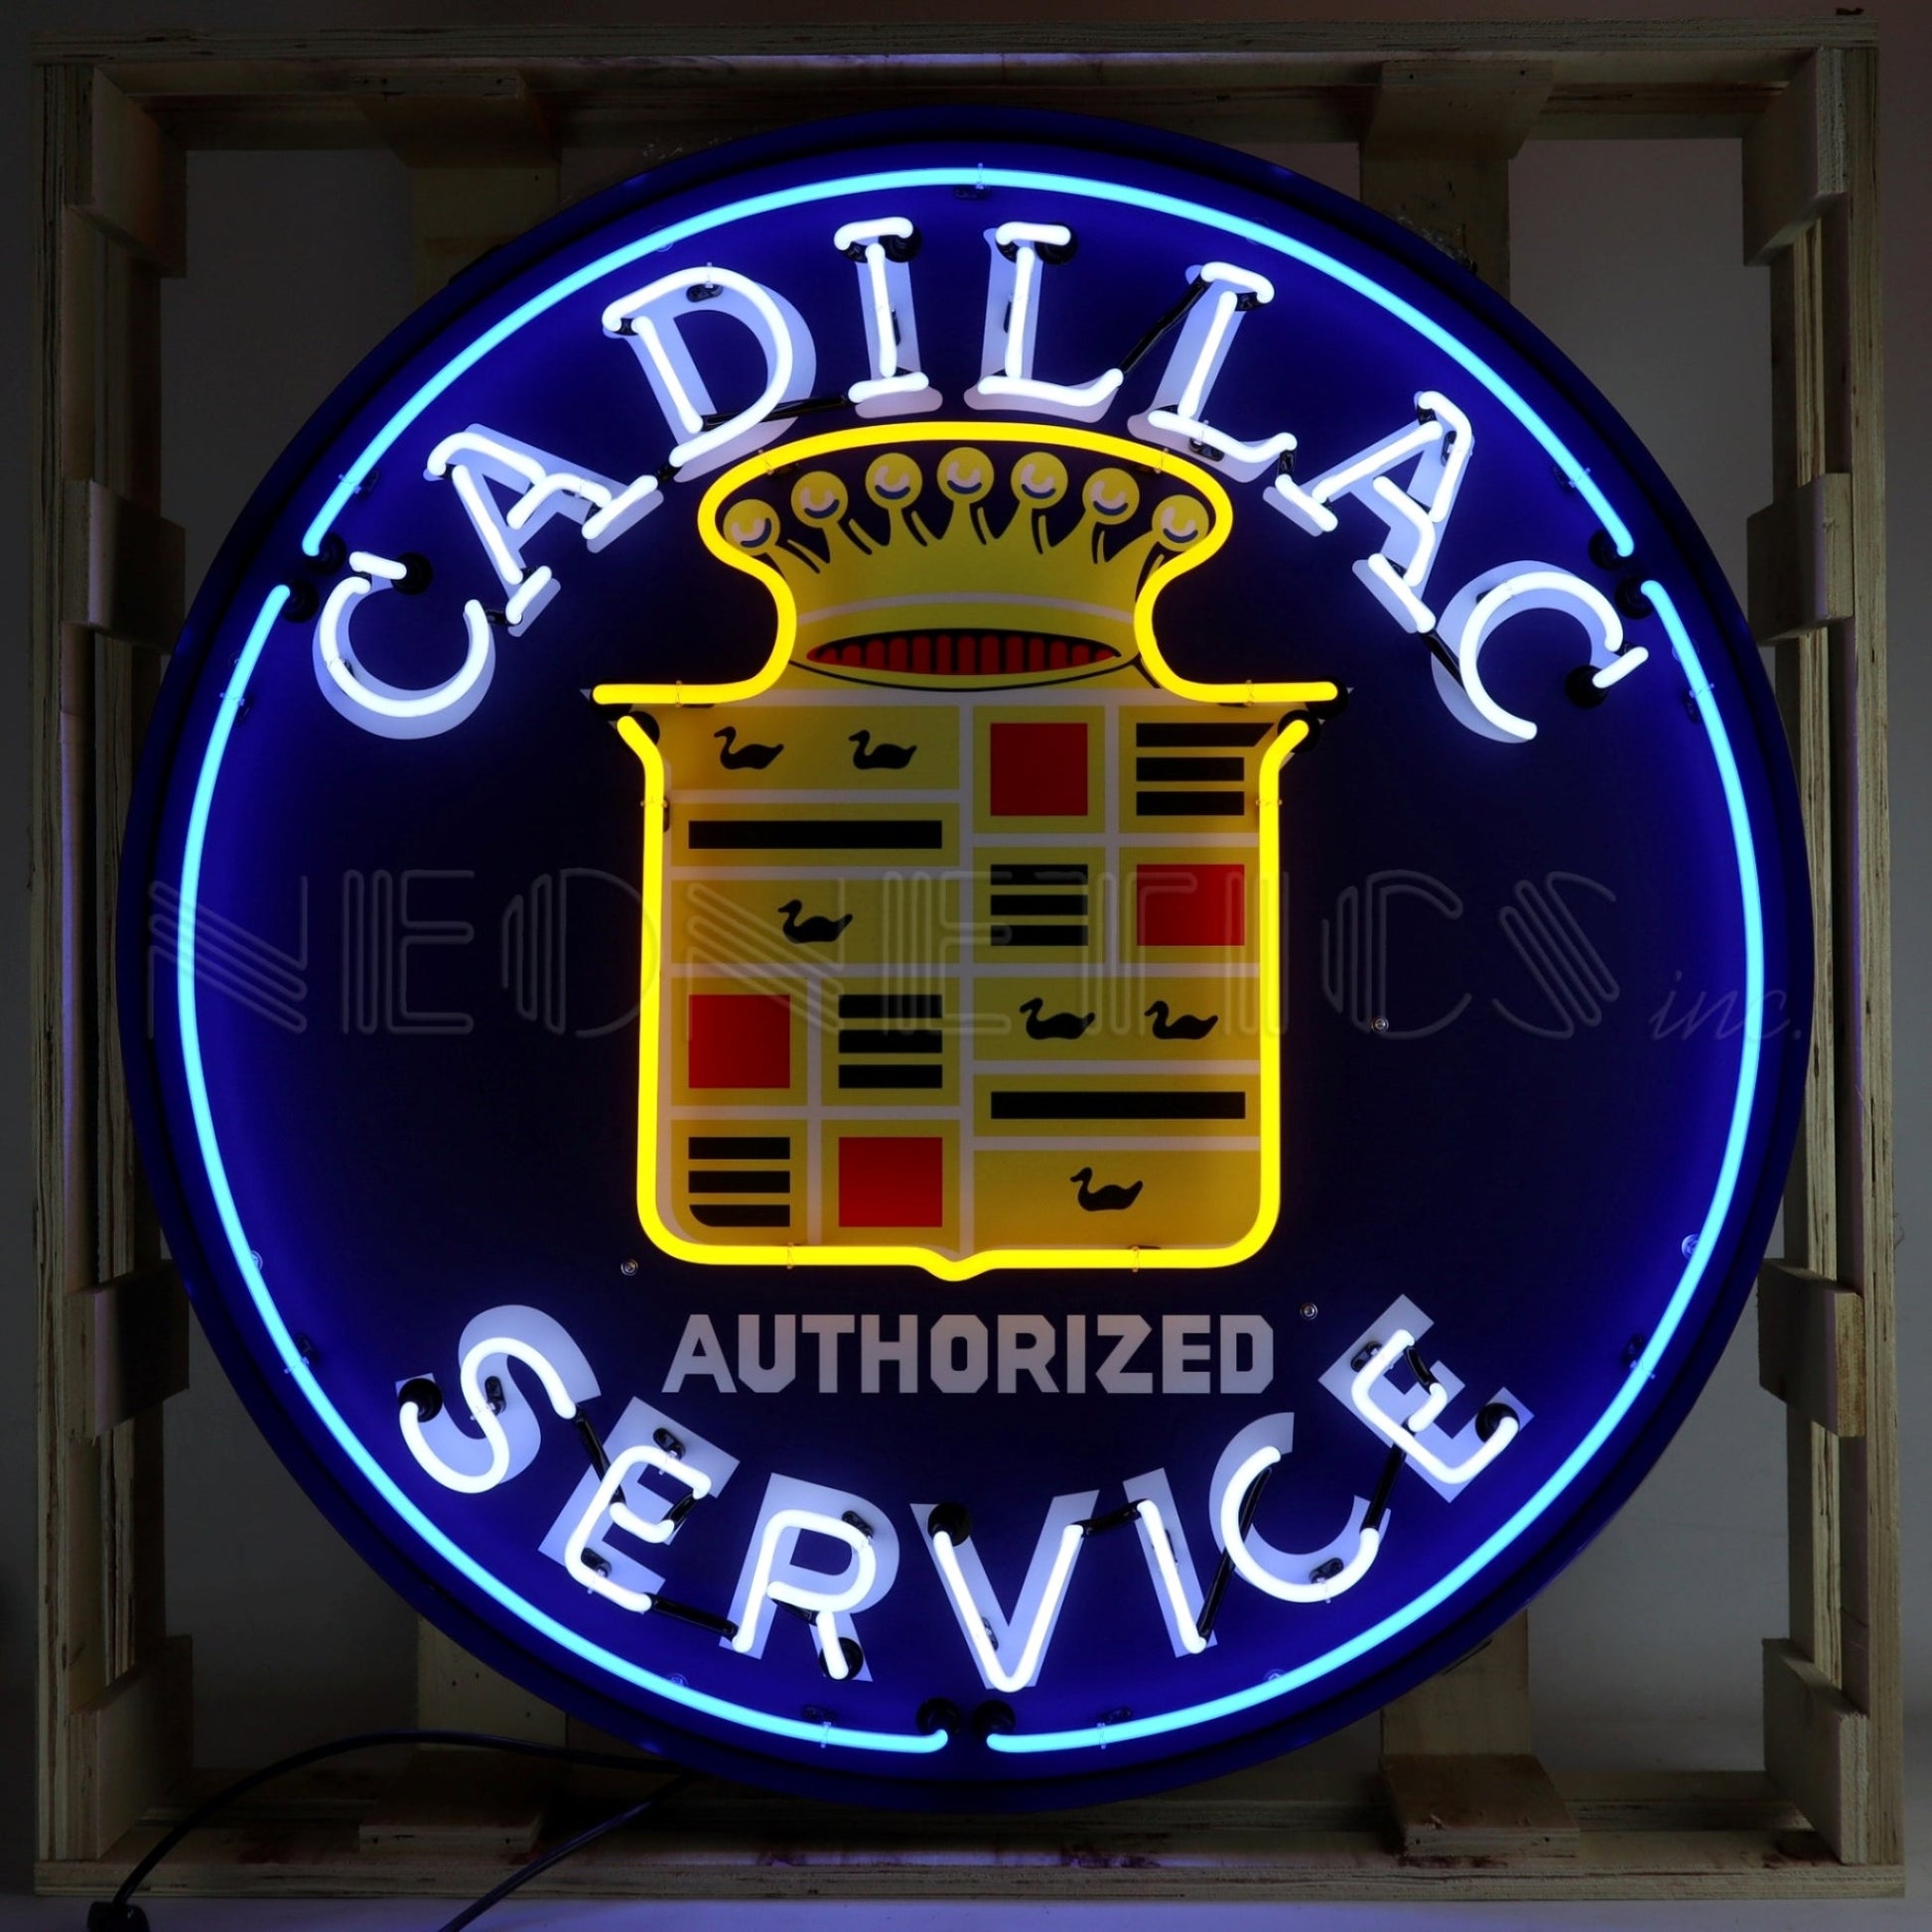 Cadillac Authorized Service neon sign in blue and yellow, 36 inches wide and high, encased in steel can.